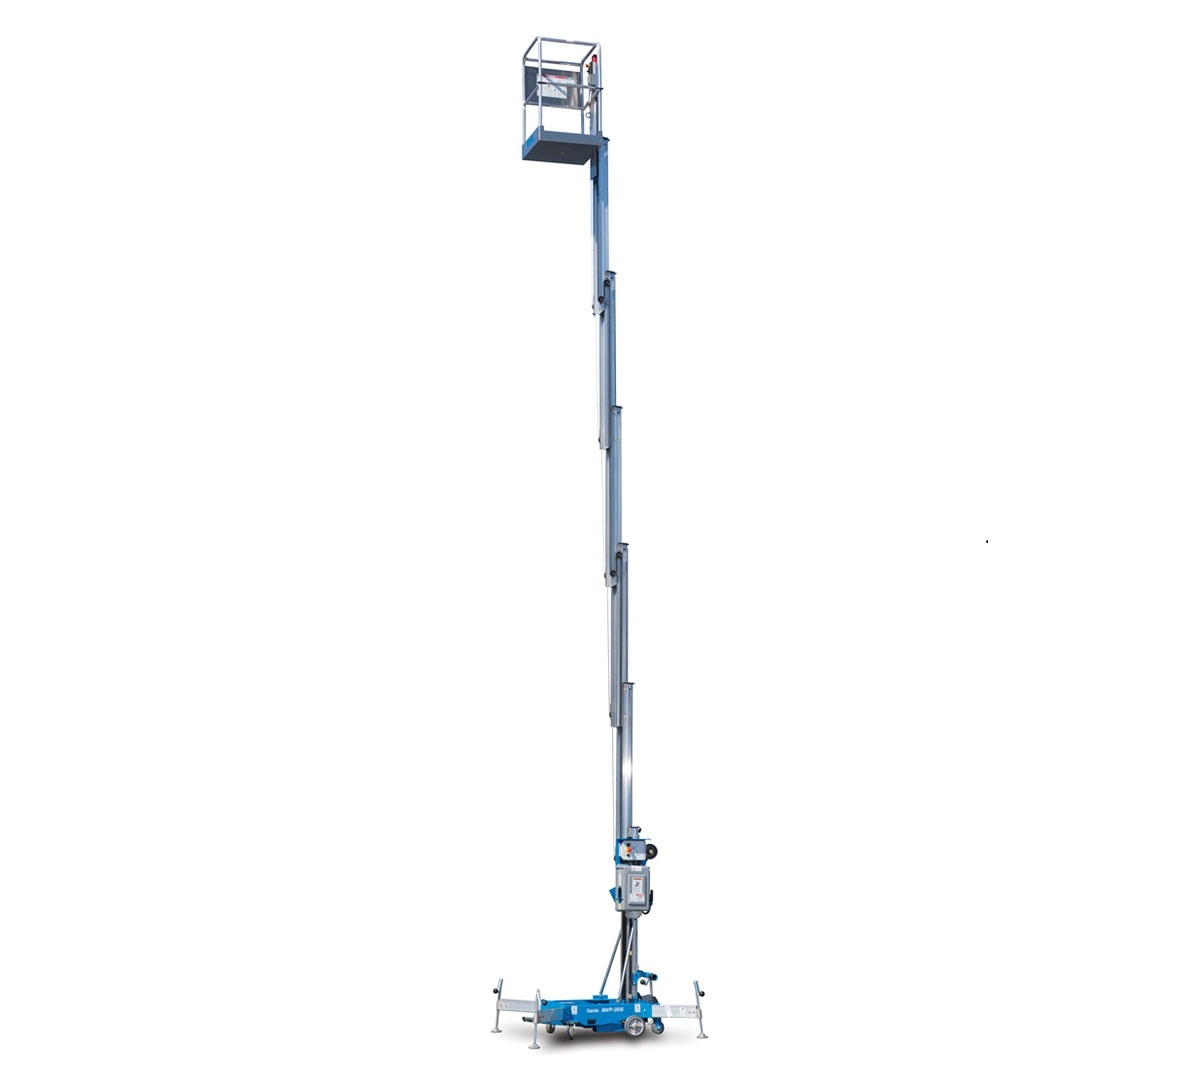 Genie self-propelled vertical mast lift for rent with a height of 11 meters